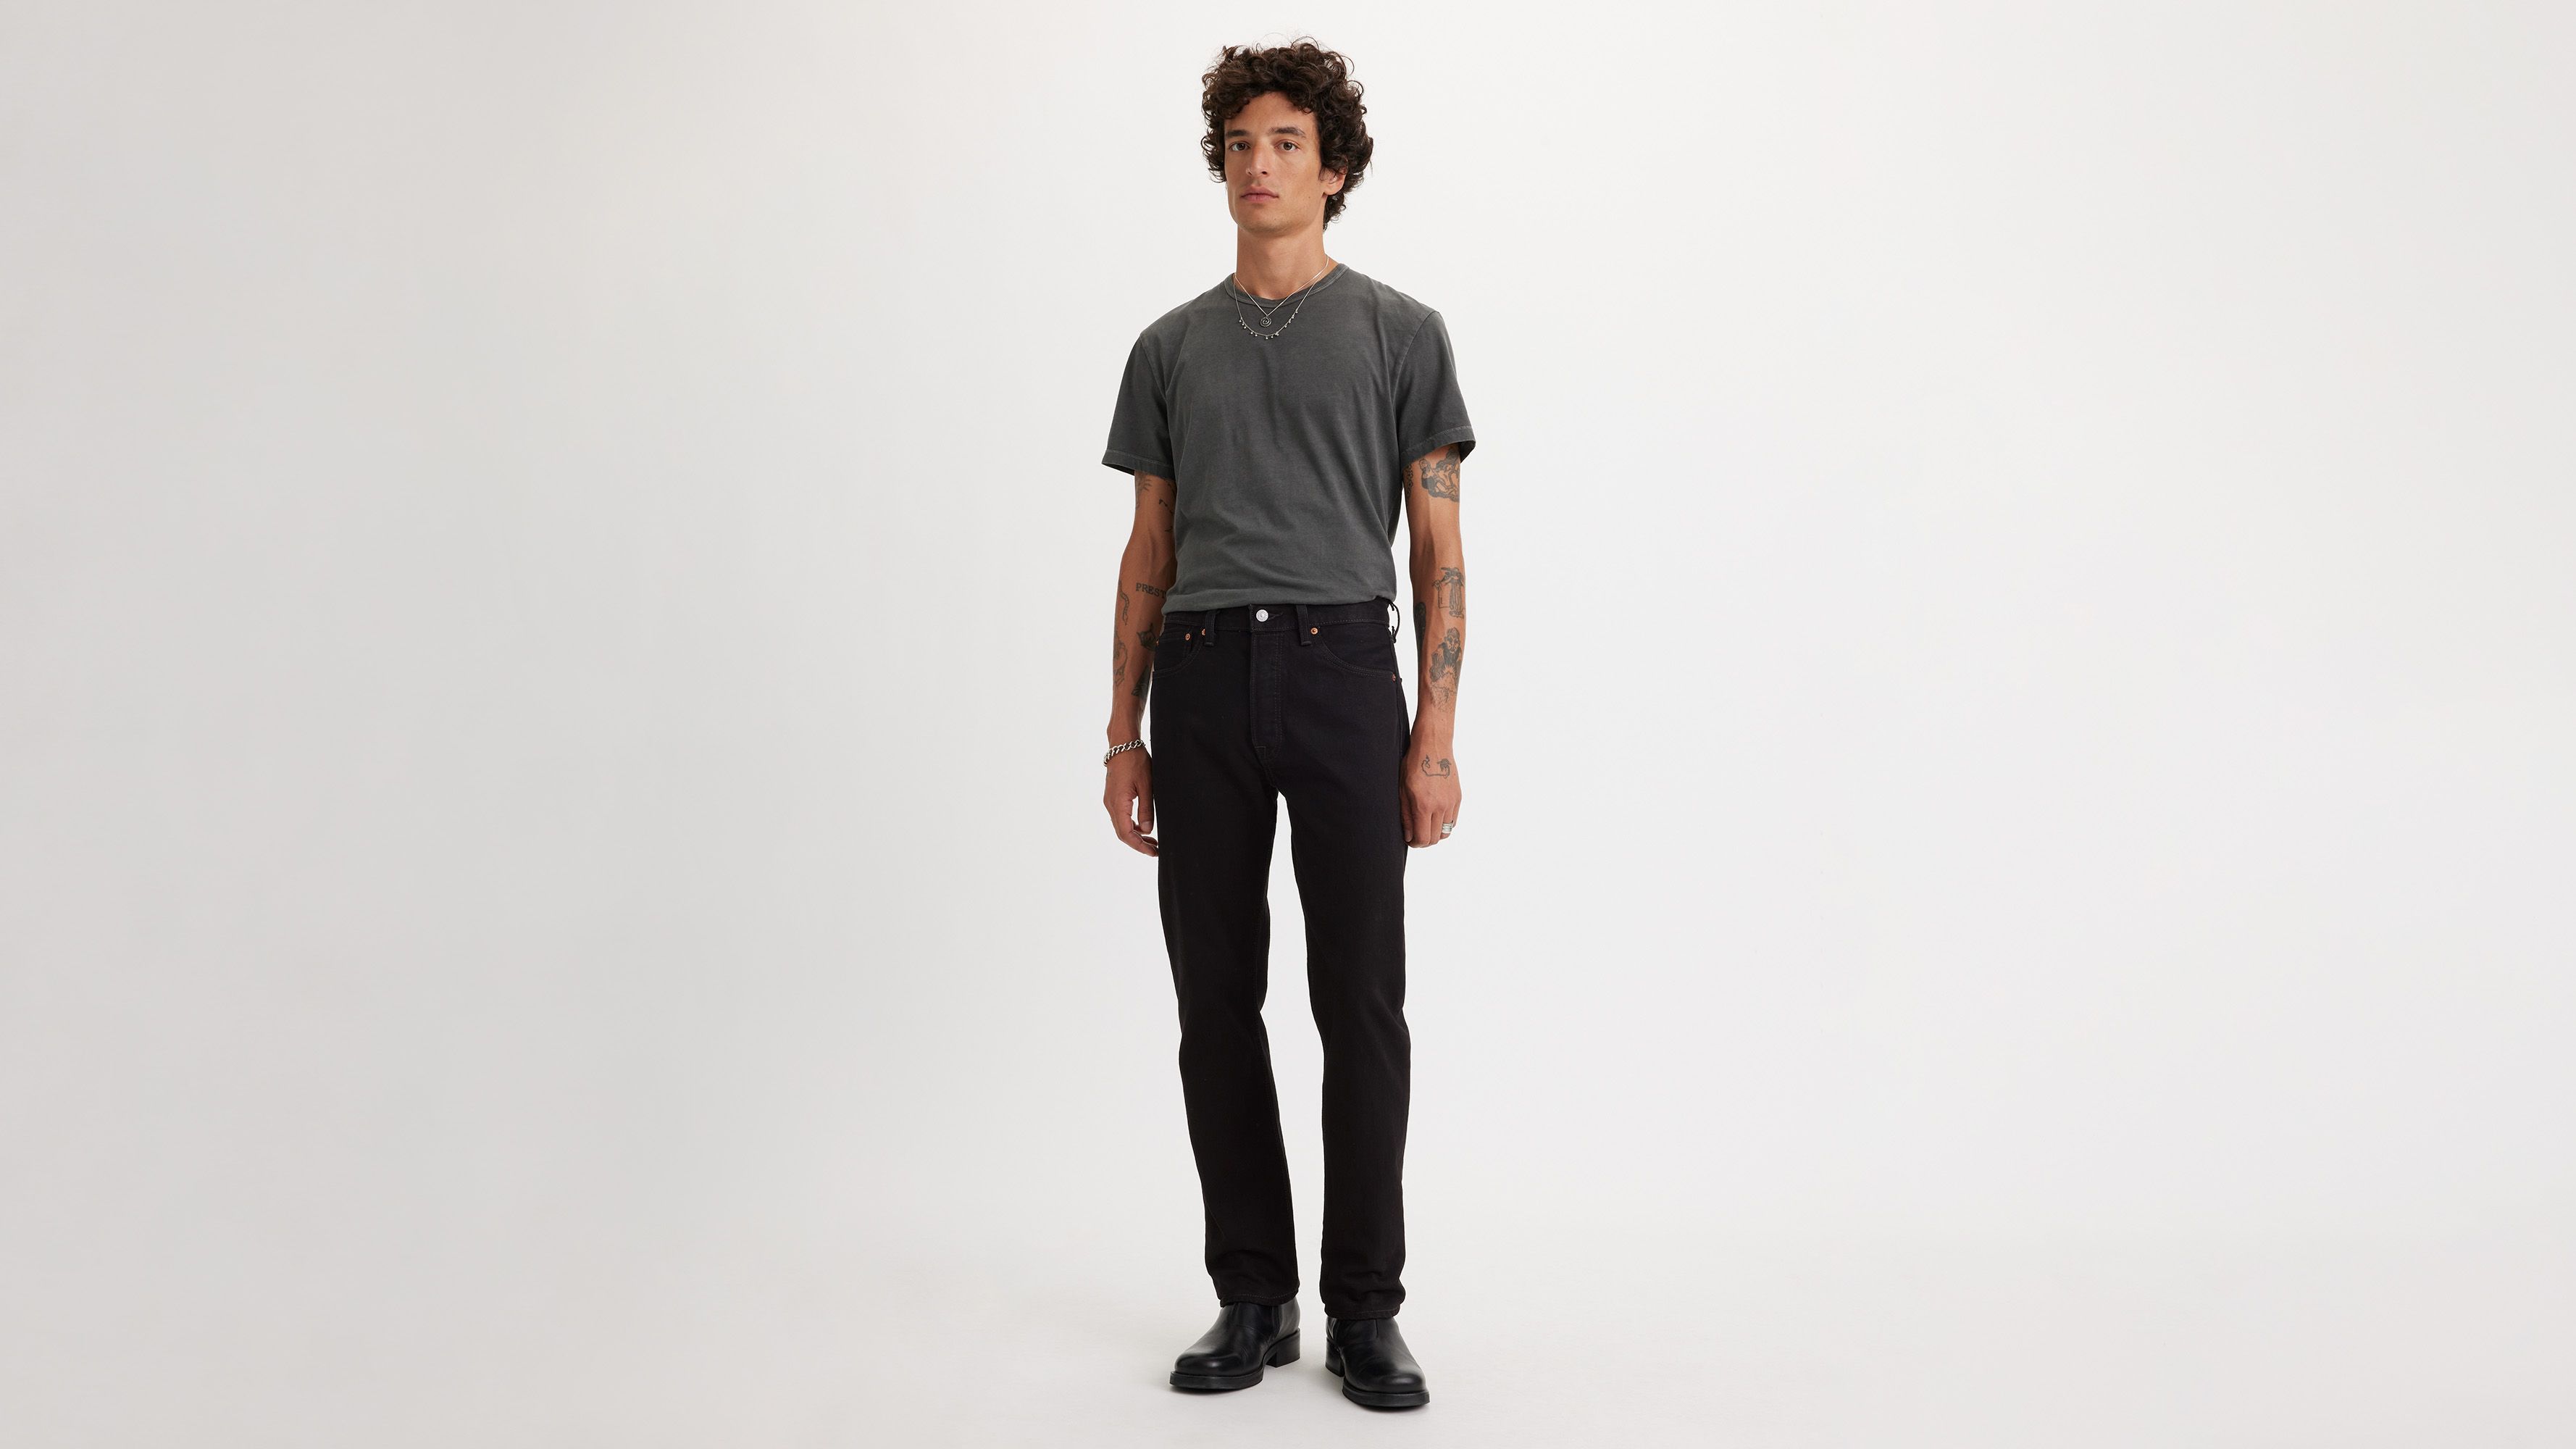 levis jeans price for man